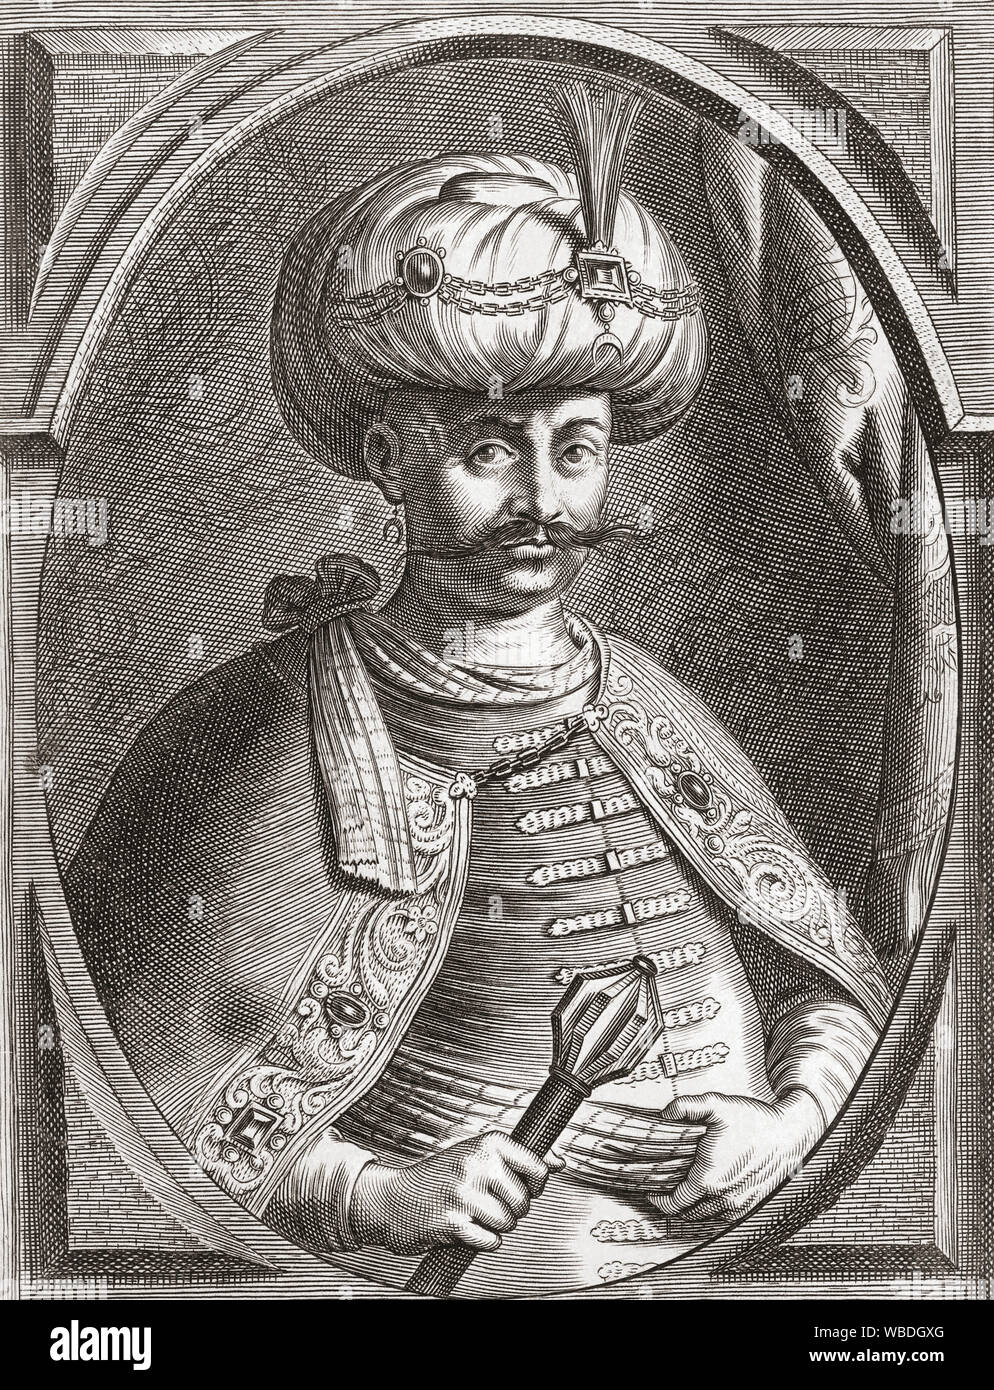 Ibrahim, Sultan of the Ottoman Empire, 1615-1648.  He ruled from 1640-1648.  Also known as Ibrahim the Mad.  After a 17th century engraving. Stock Photo